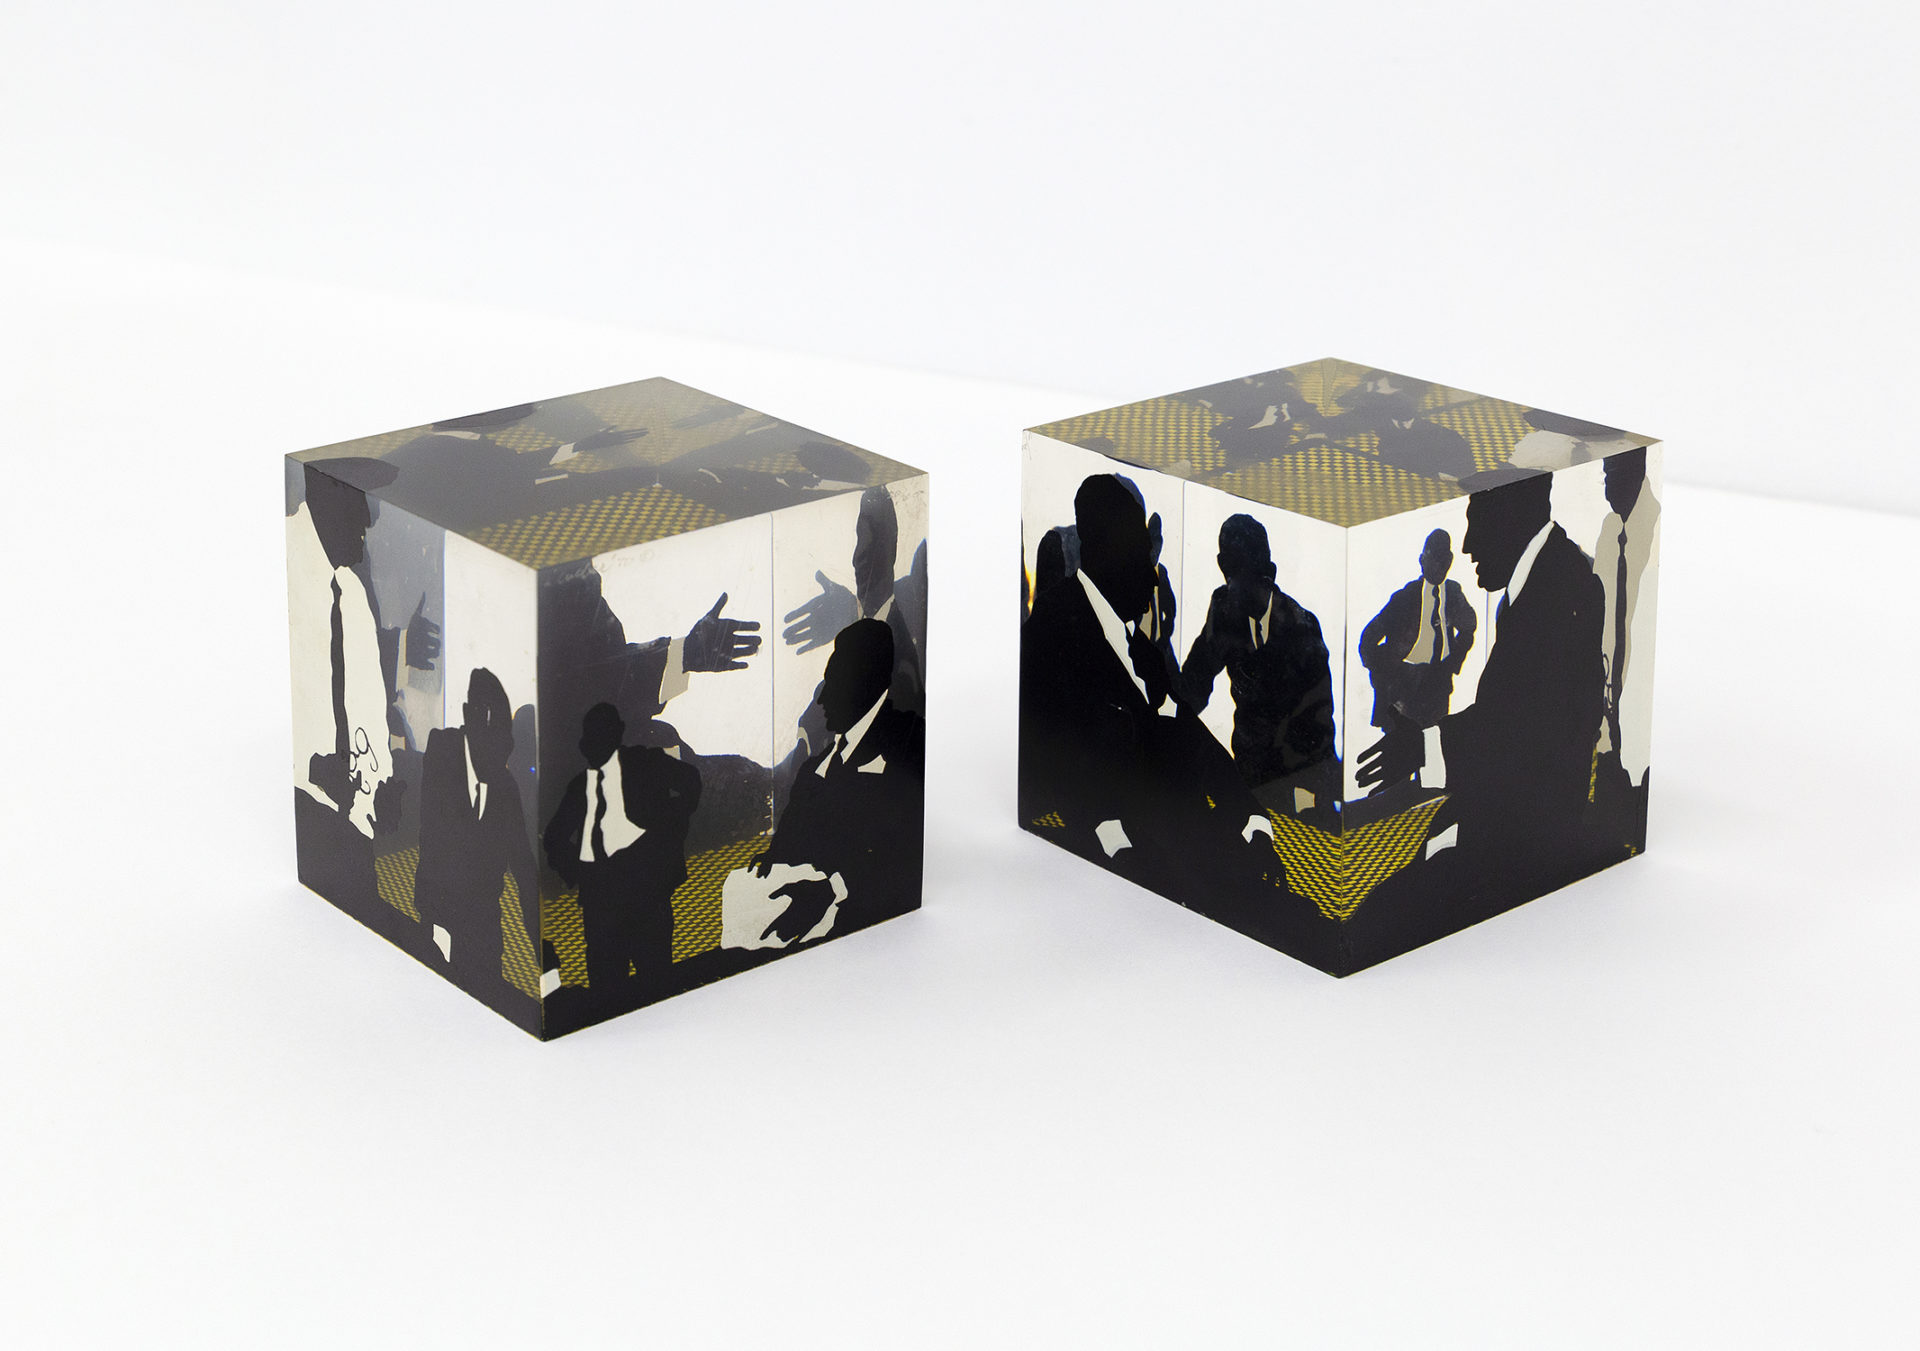 Untitled (pair), 1970, Screenprint on acrylic cubes, 4 x 4 x 4 inches (10.2 x 10.2 x 10.2 cm), Edition of 100